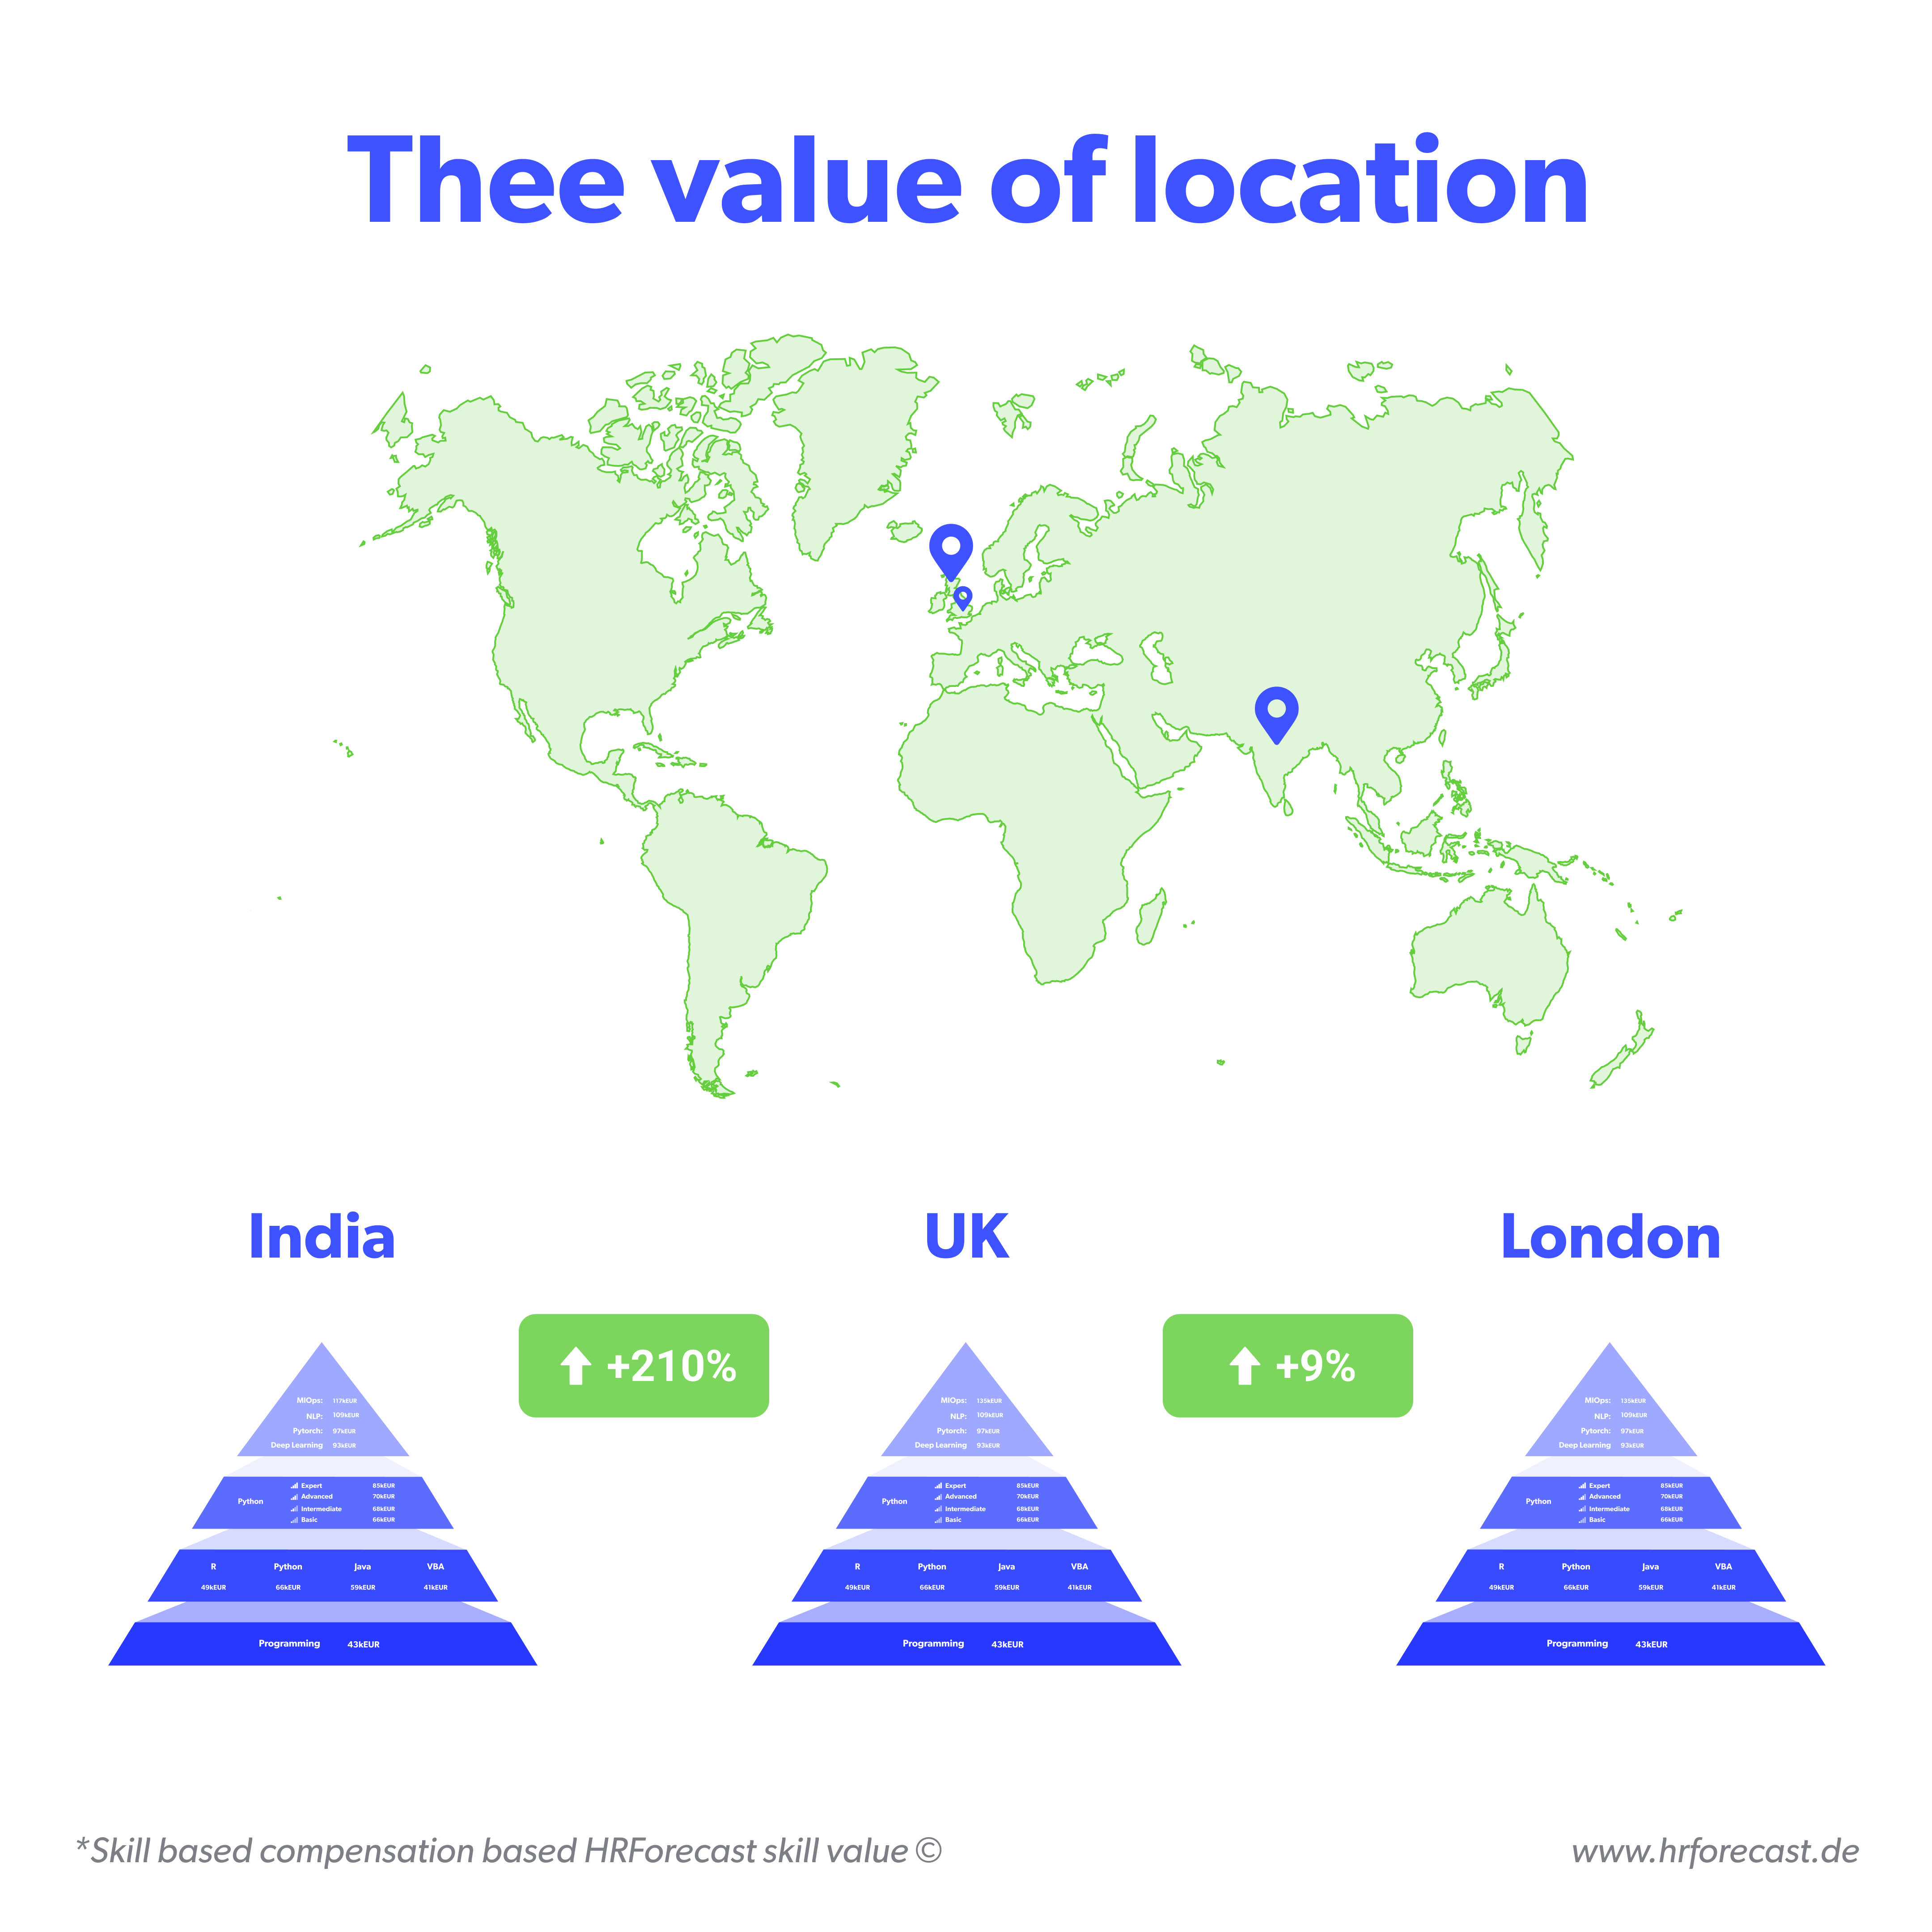 The value of location